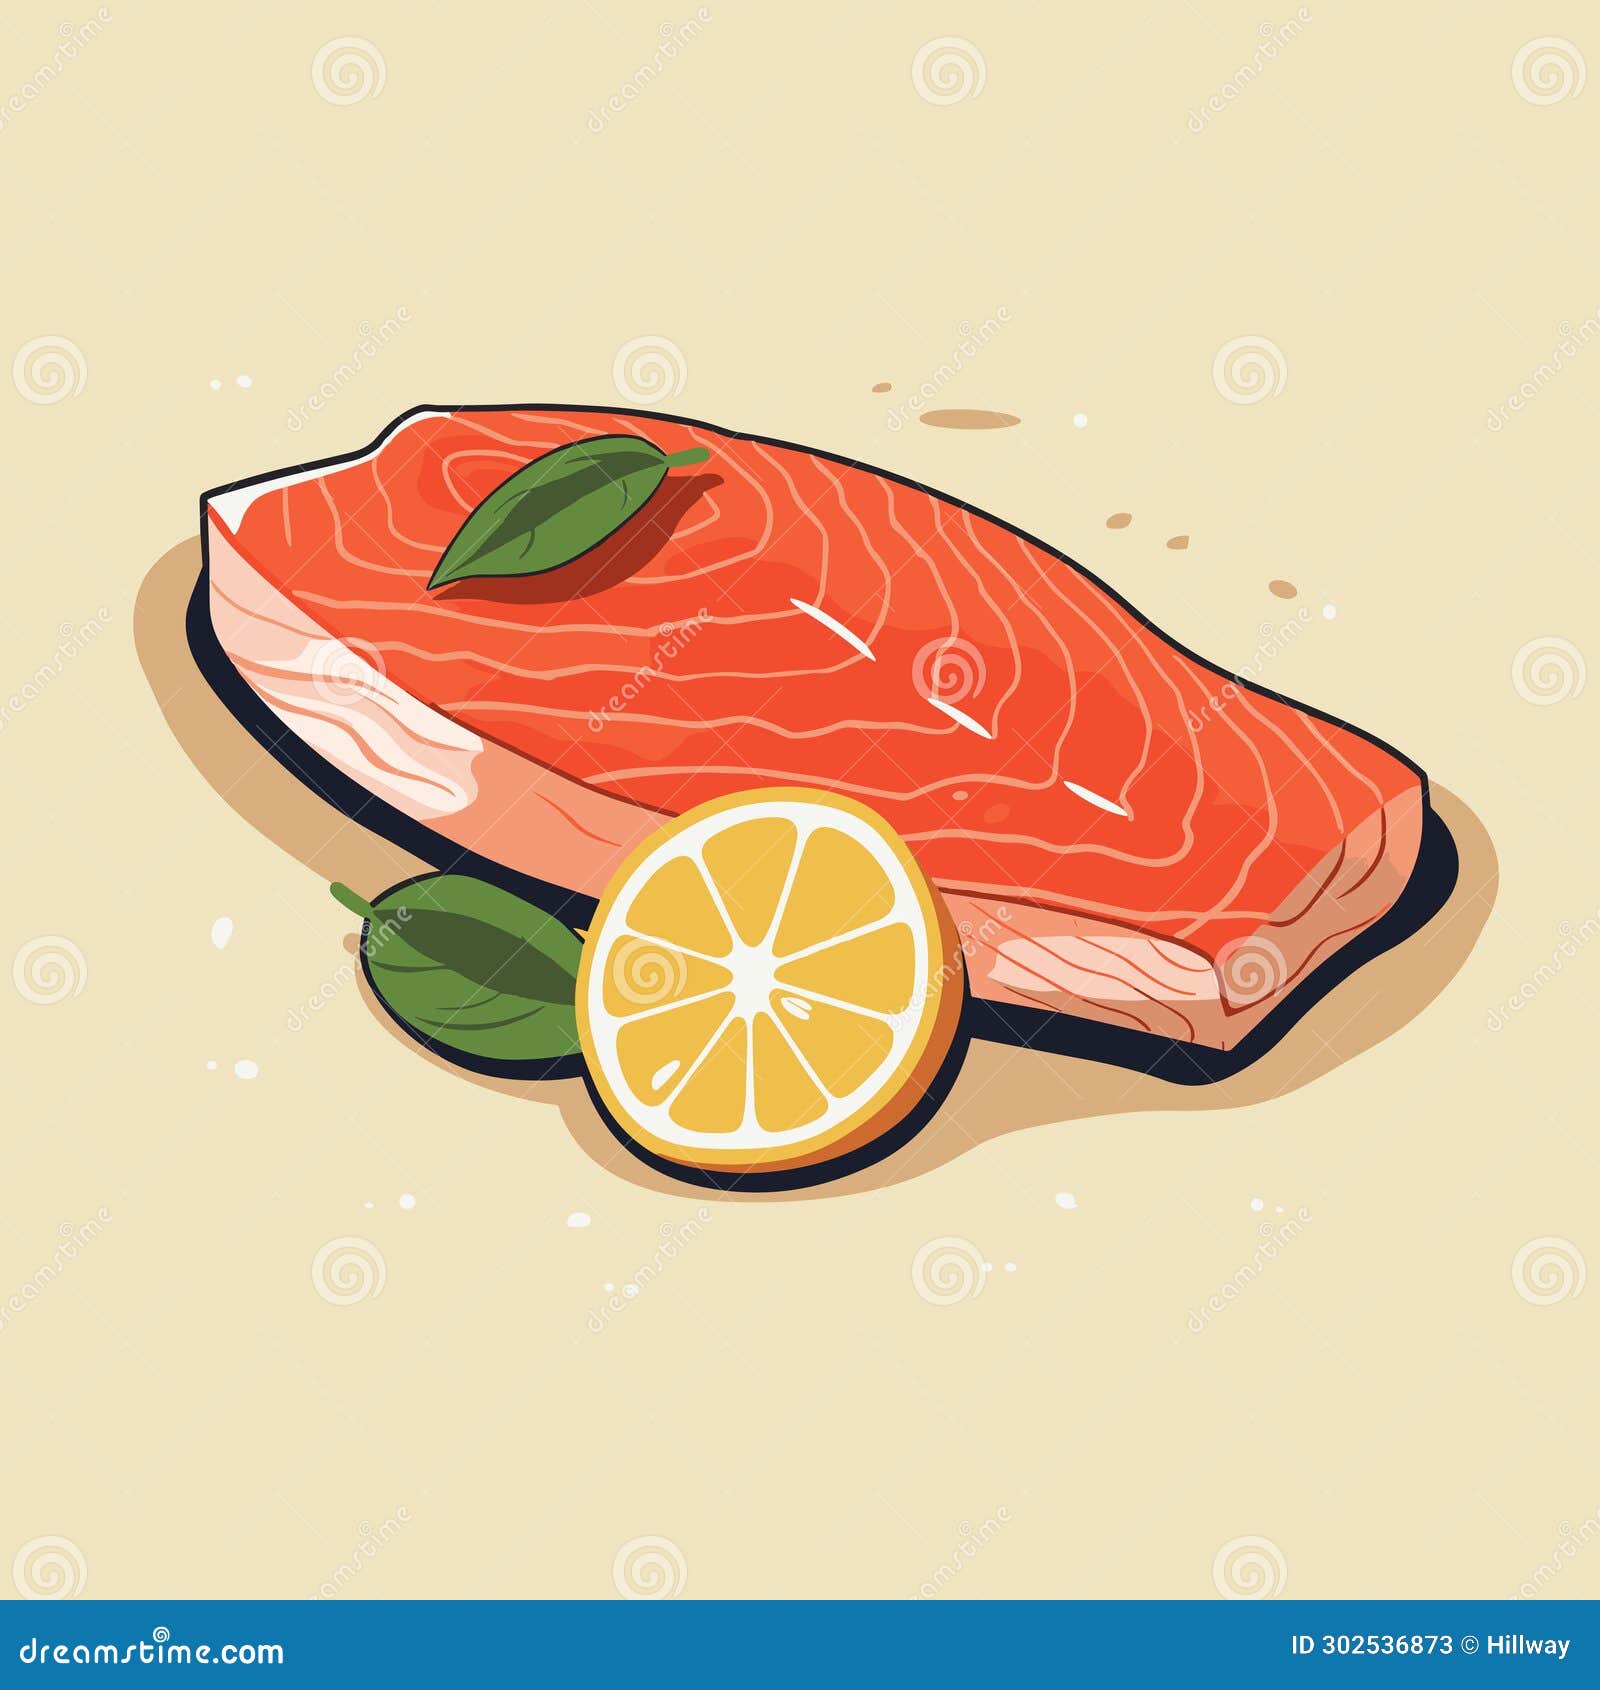 Grilled Salmon Fillet Fish. Cooked Tuna Steak. Cartoon Vector Seafood ...